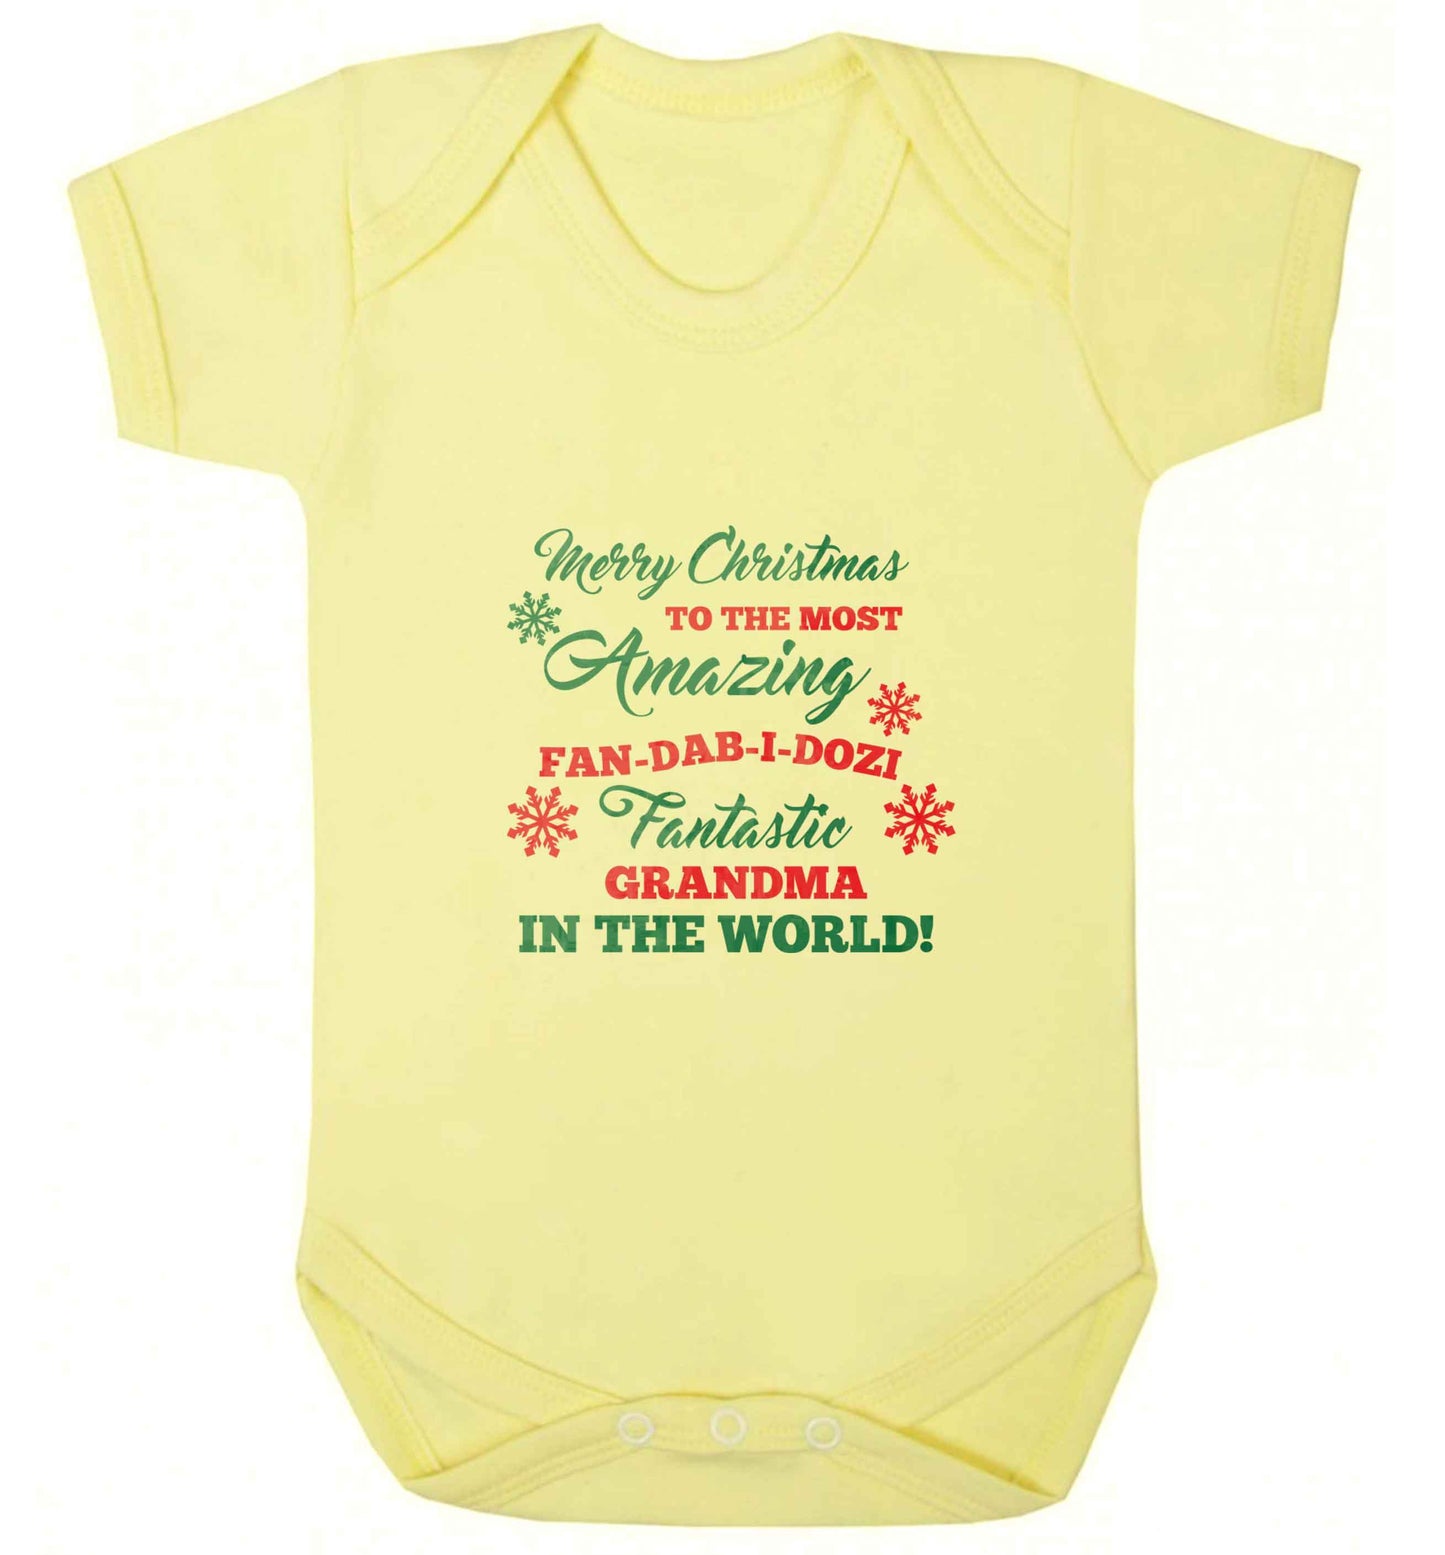 Merry Christmas to the most amazing fan-dab-i-dozi fantasic Grandma in the world baby vest pale yellow 18-24 months